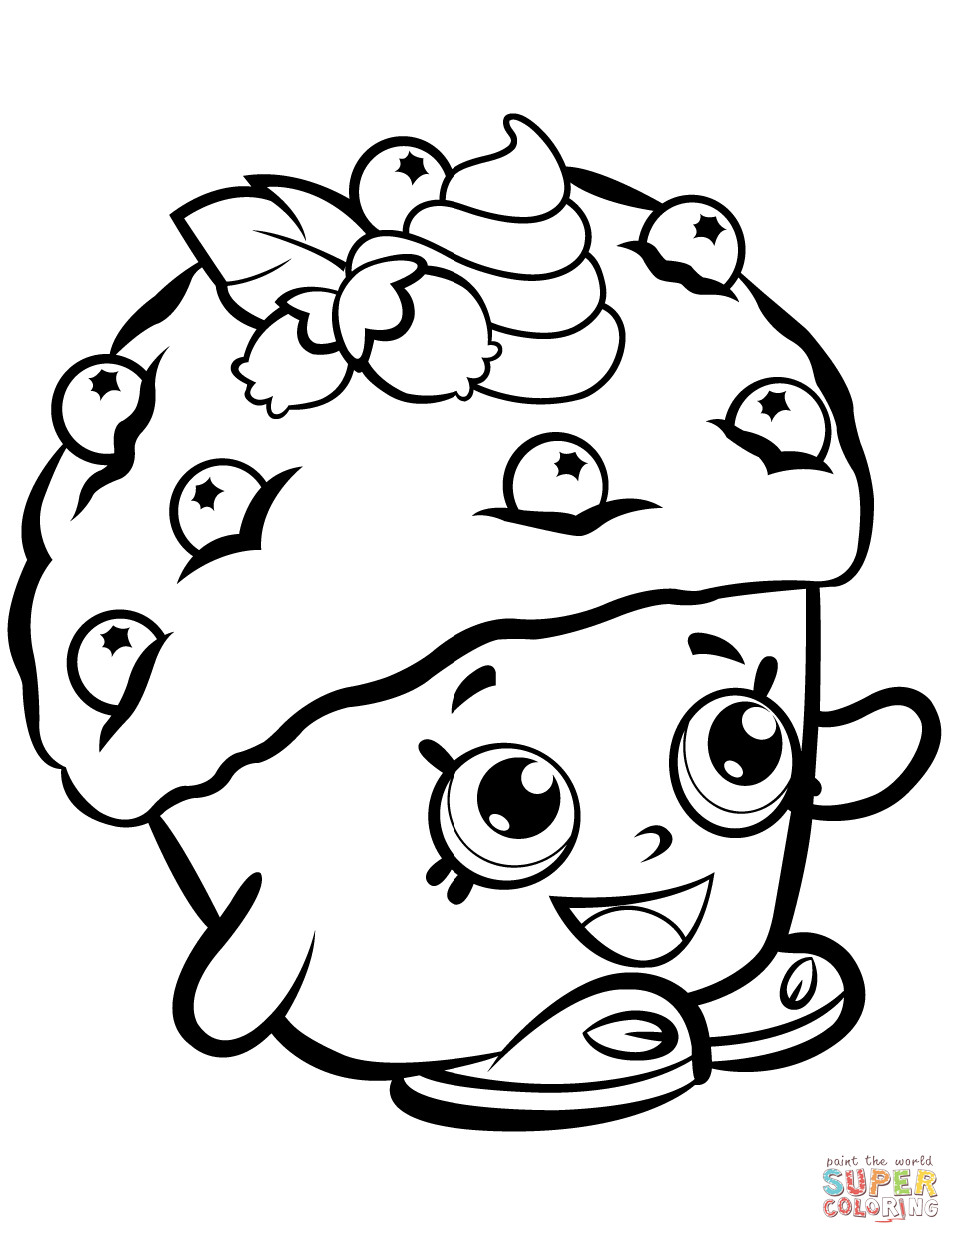 Printable Shopkin Coloring Pages
 Mini Muffin Shopkin coloring page